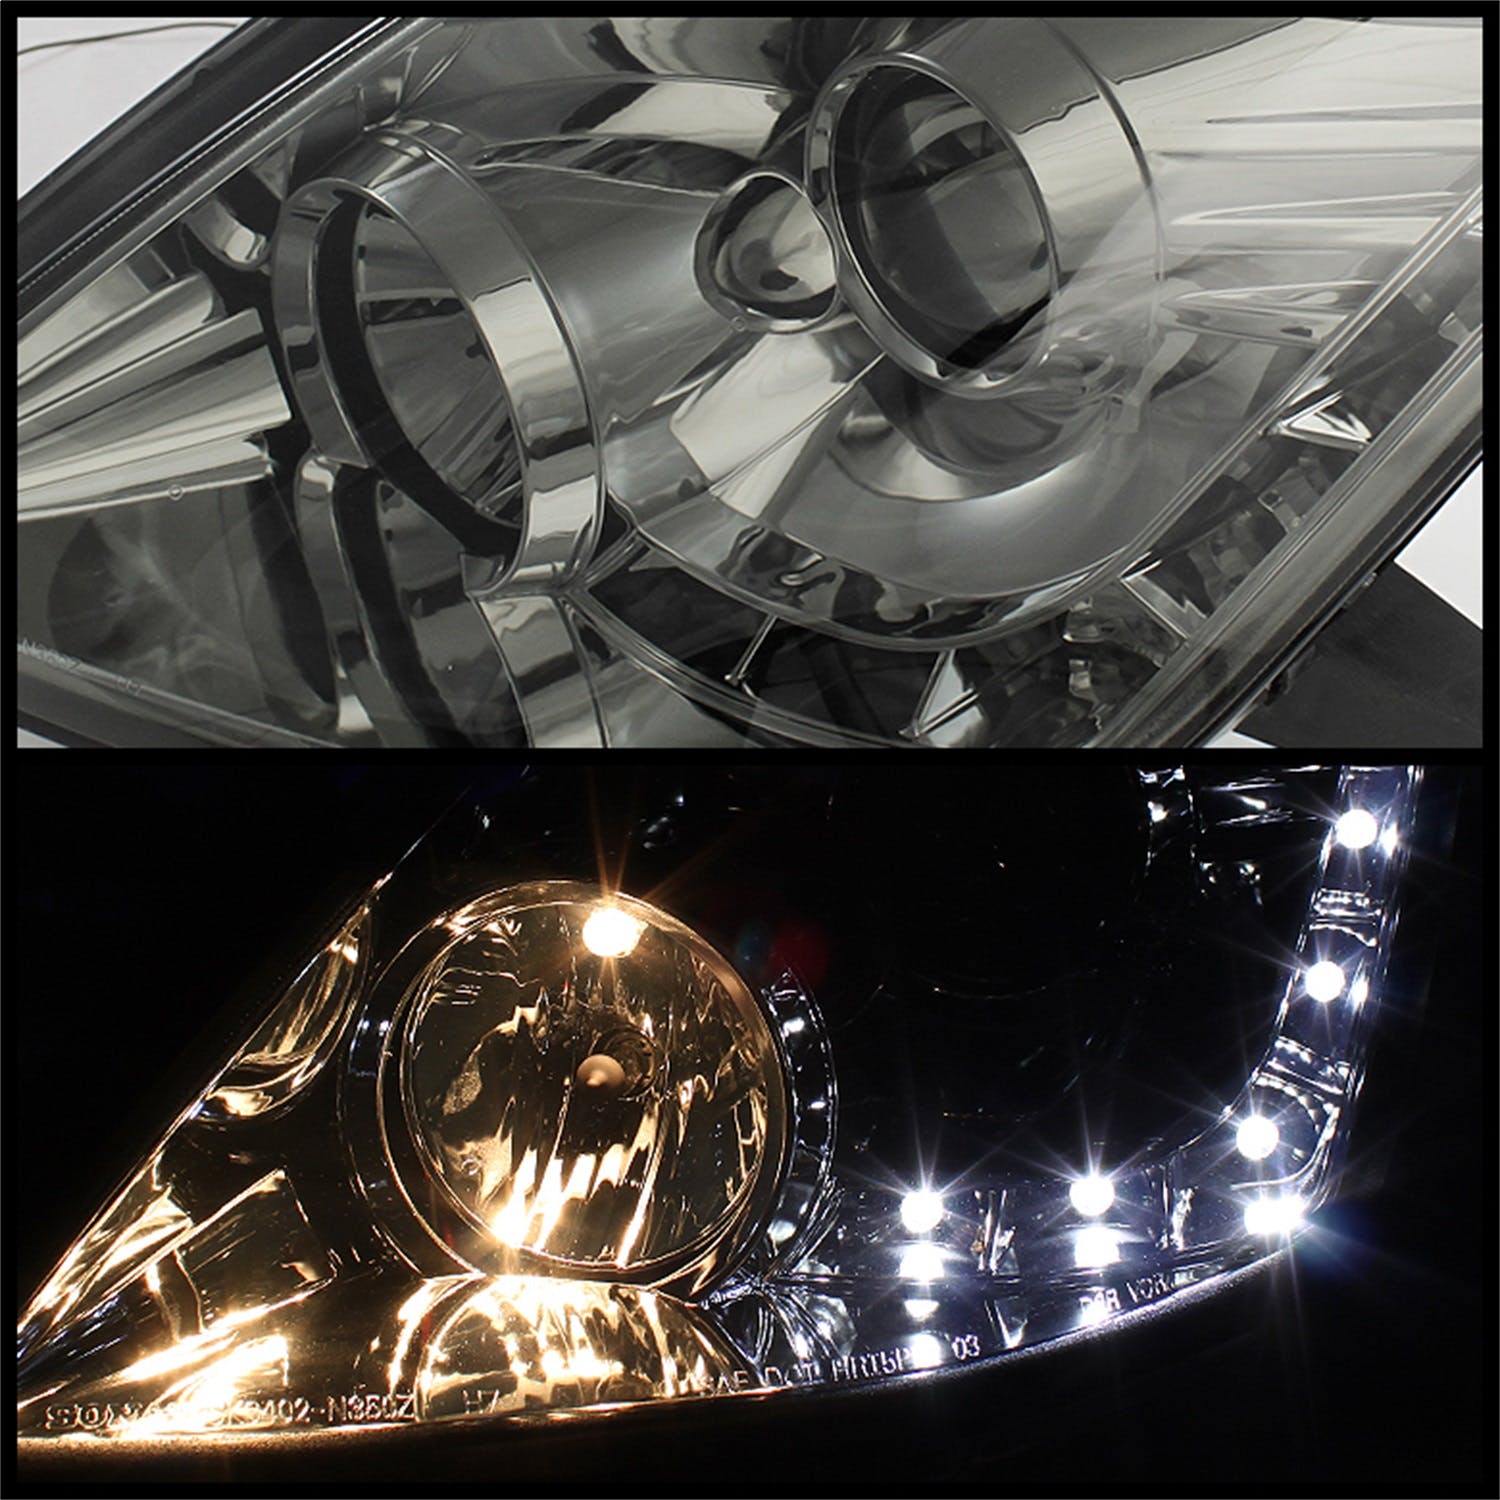 Spyder Auto 5042323 (Spyder) Nissan 350Z 06-08 Projector Headlights-Xenon/HID Model Only ( Not Compa